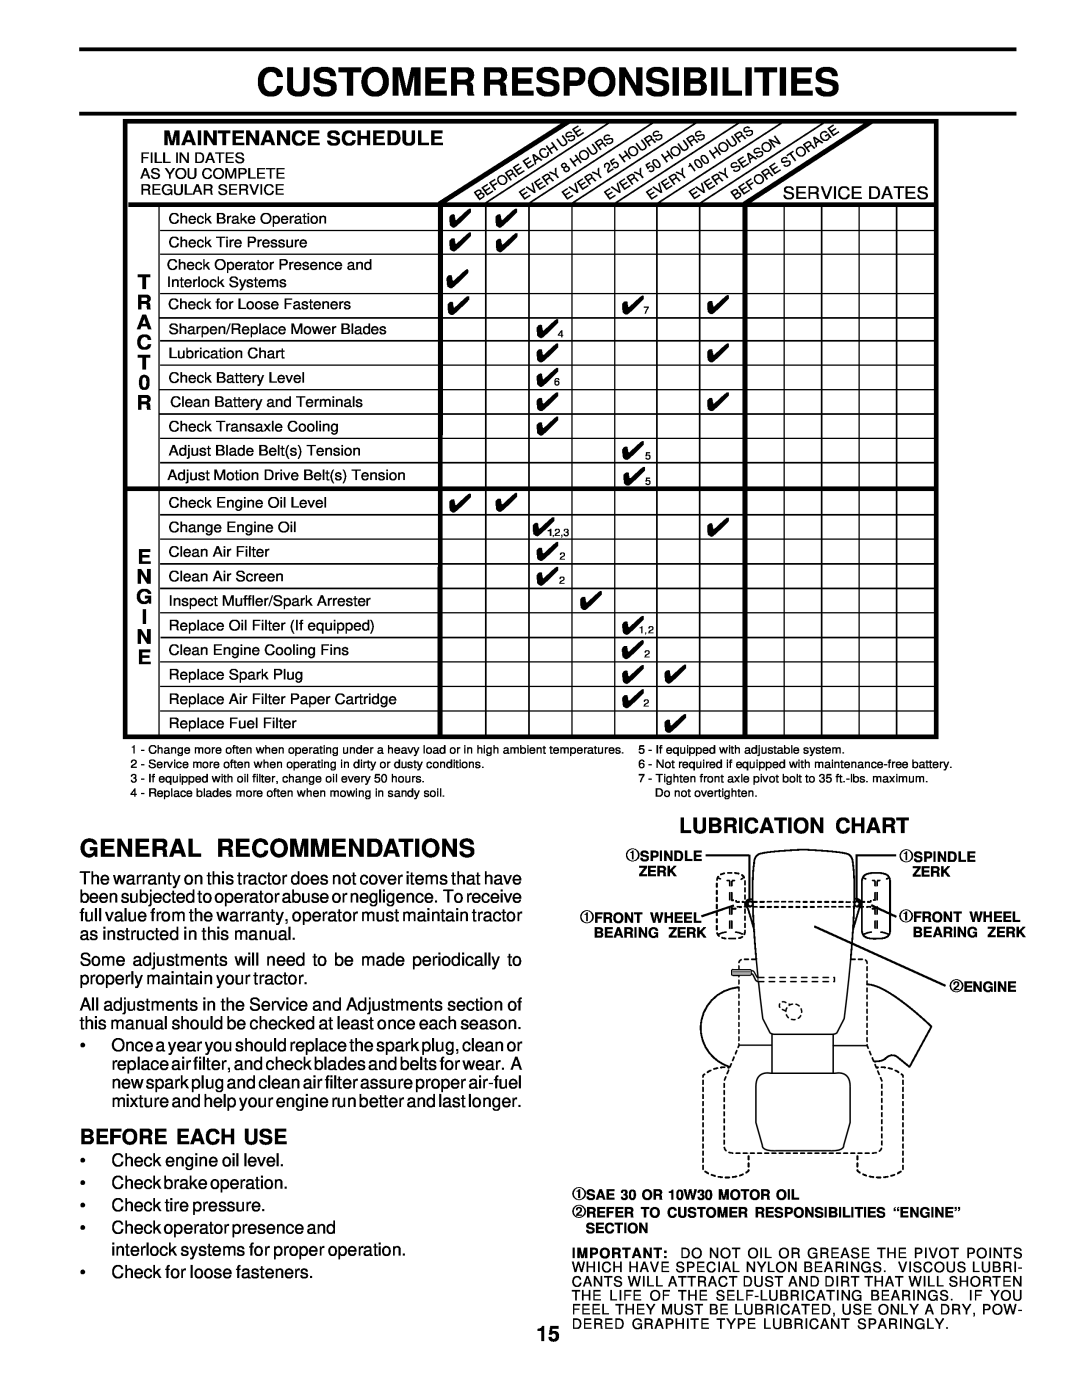 Poulan 176085 owner manual Customer Responsibilities, General Recommendations, Before Each Use, Maintenance Schedule 